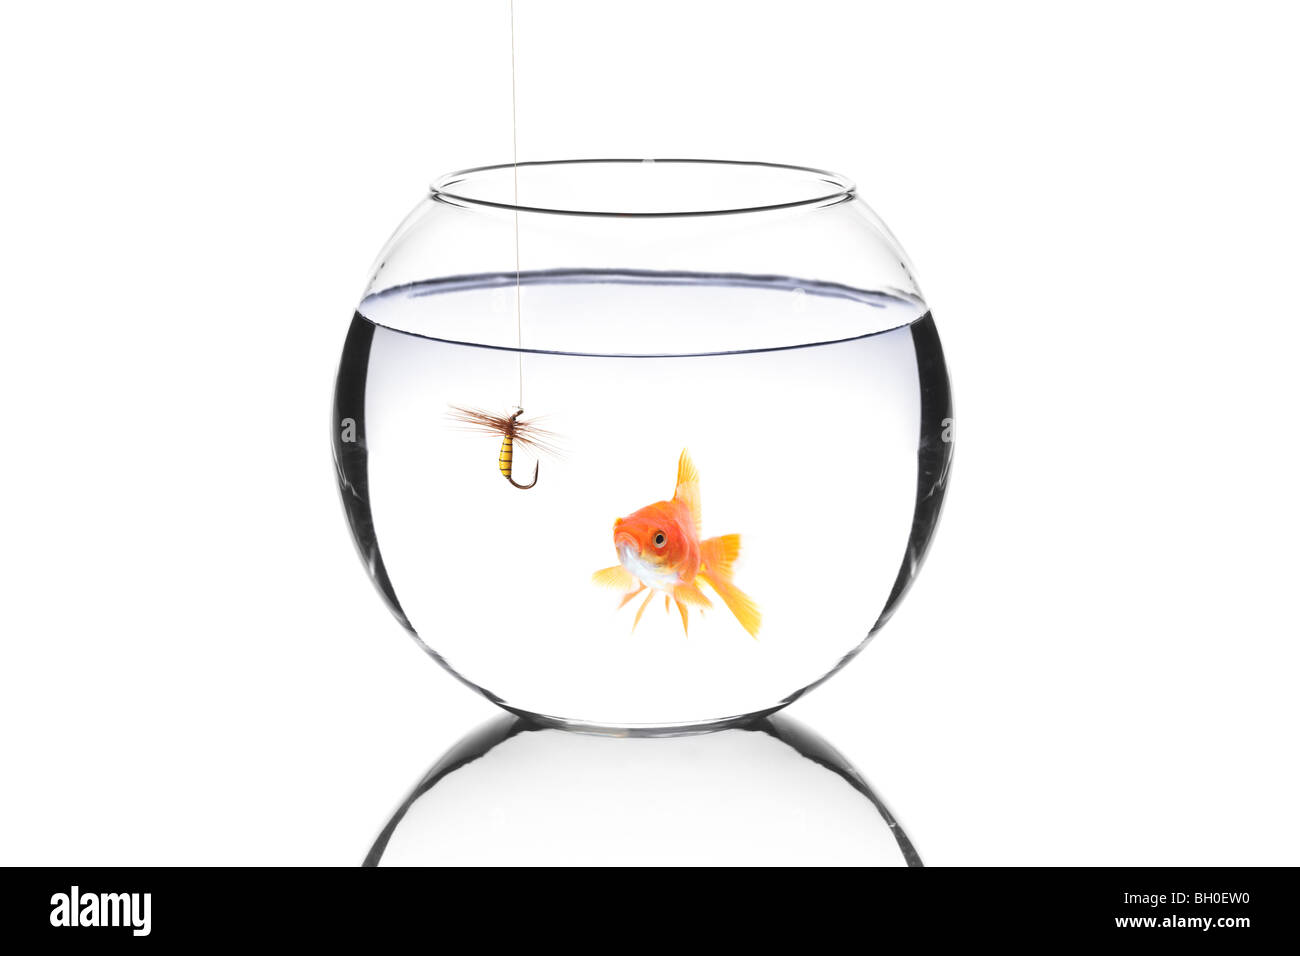 Fish bowl with fish isolated on white background Stock Photo